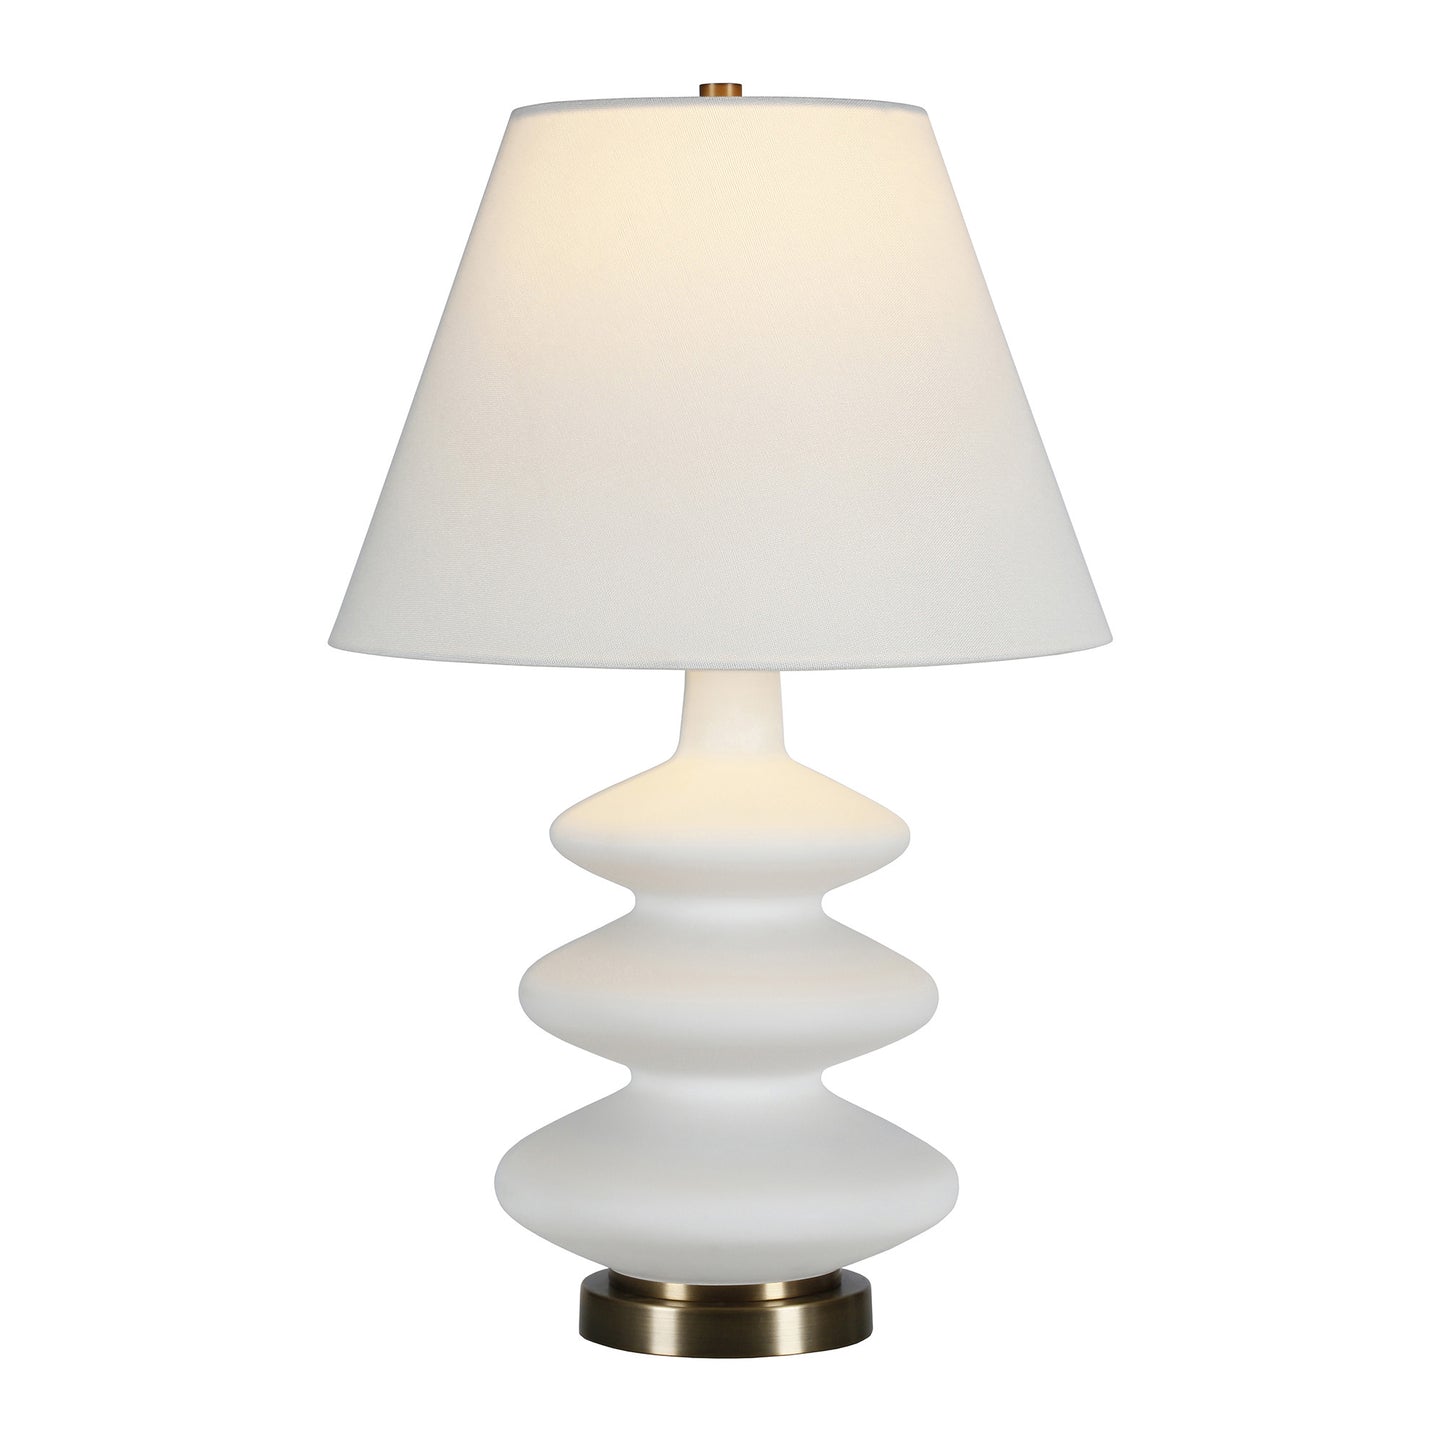 26" Gold and White Glass Table Lamp With White Empire Shade